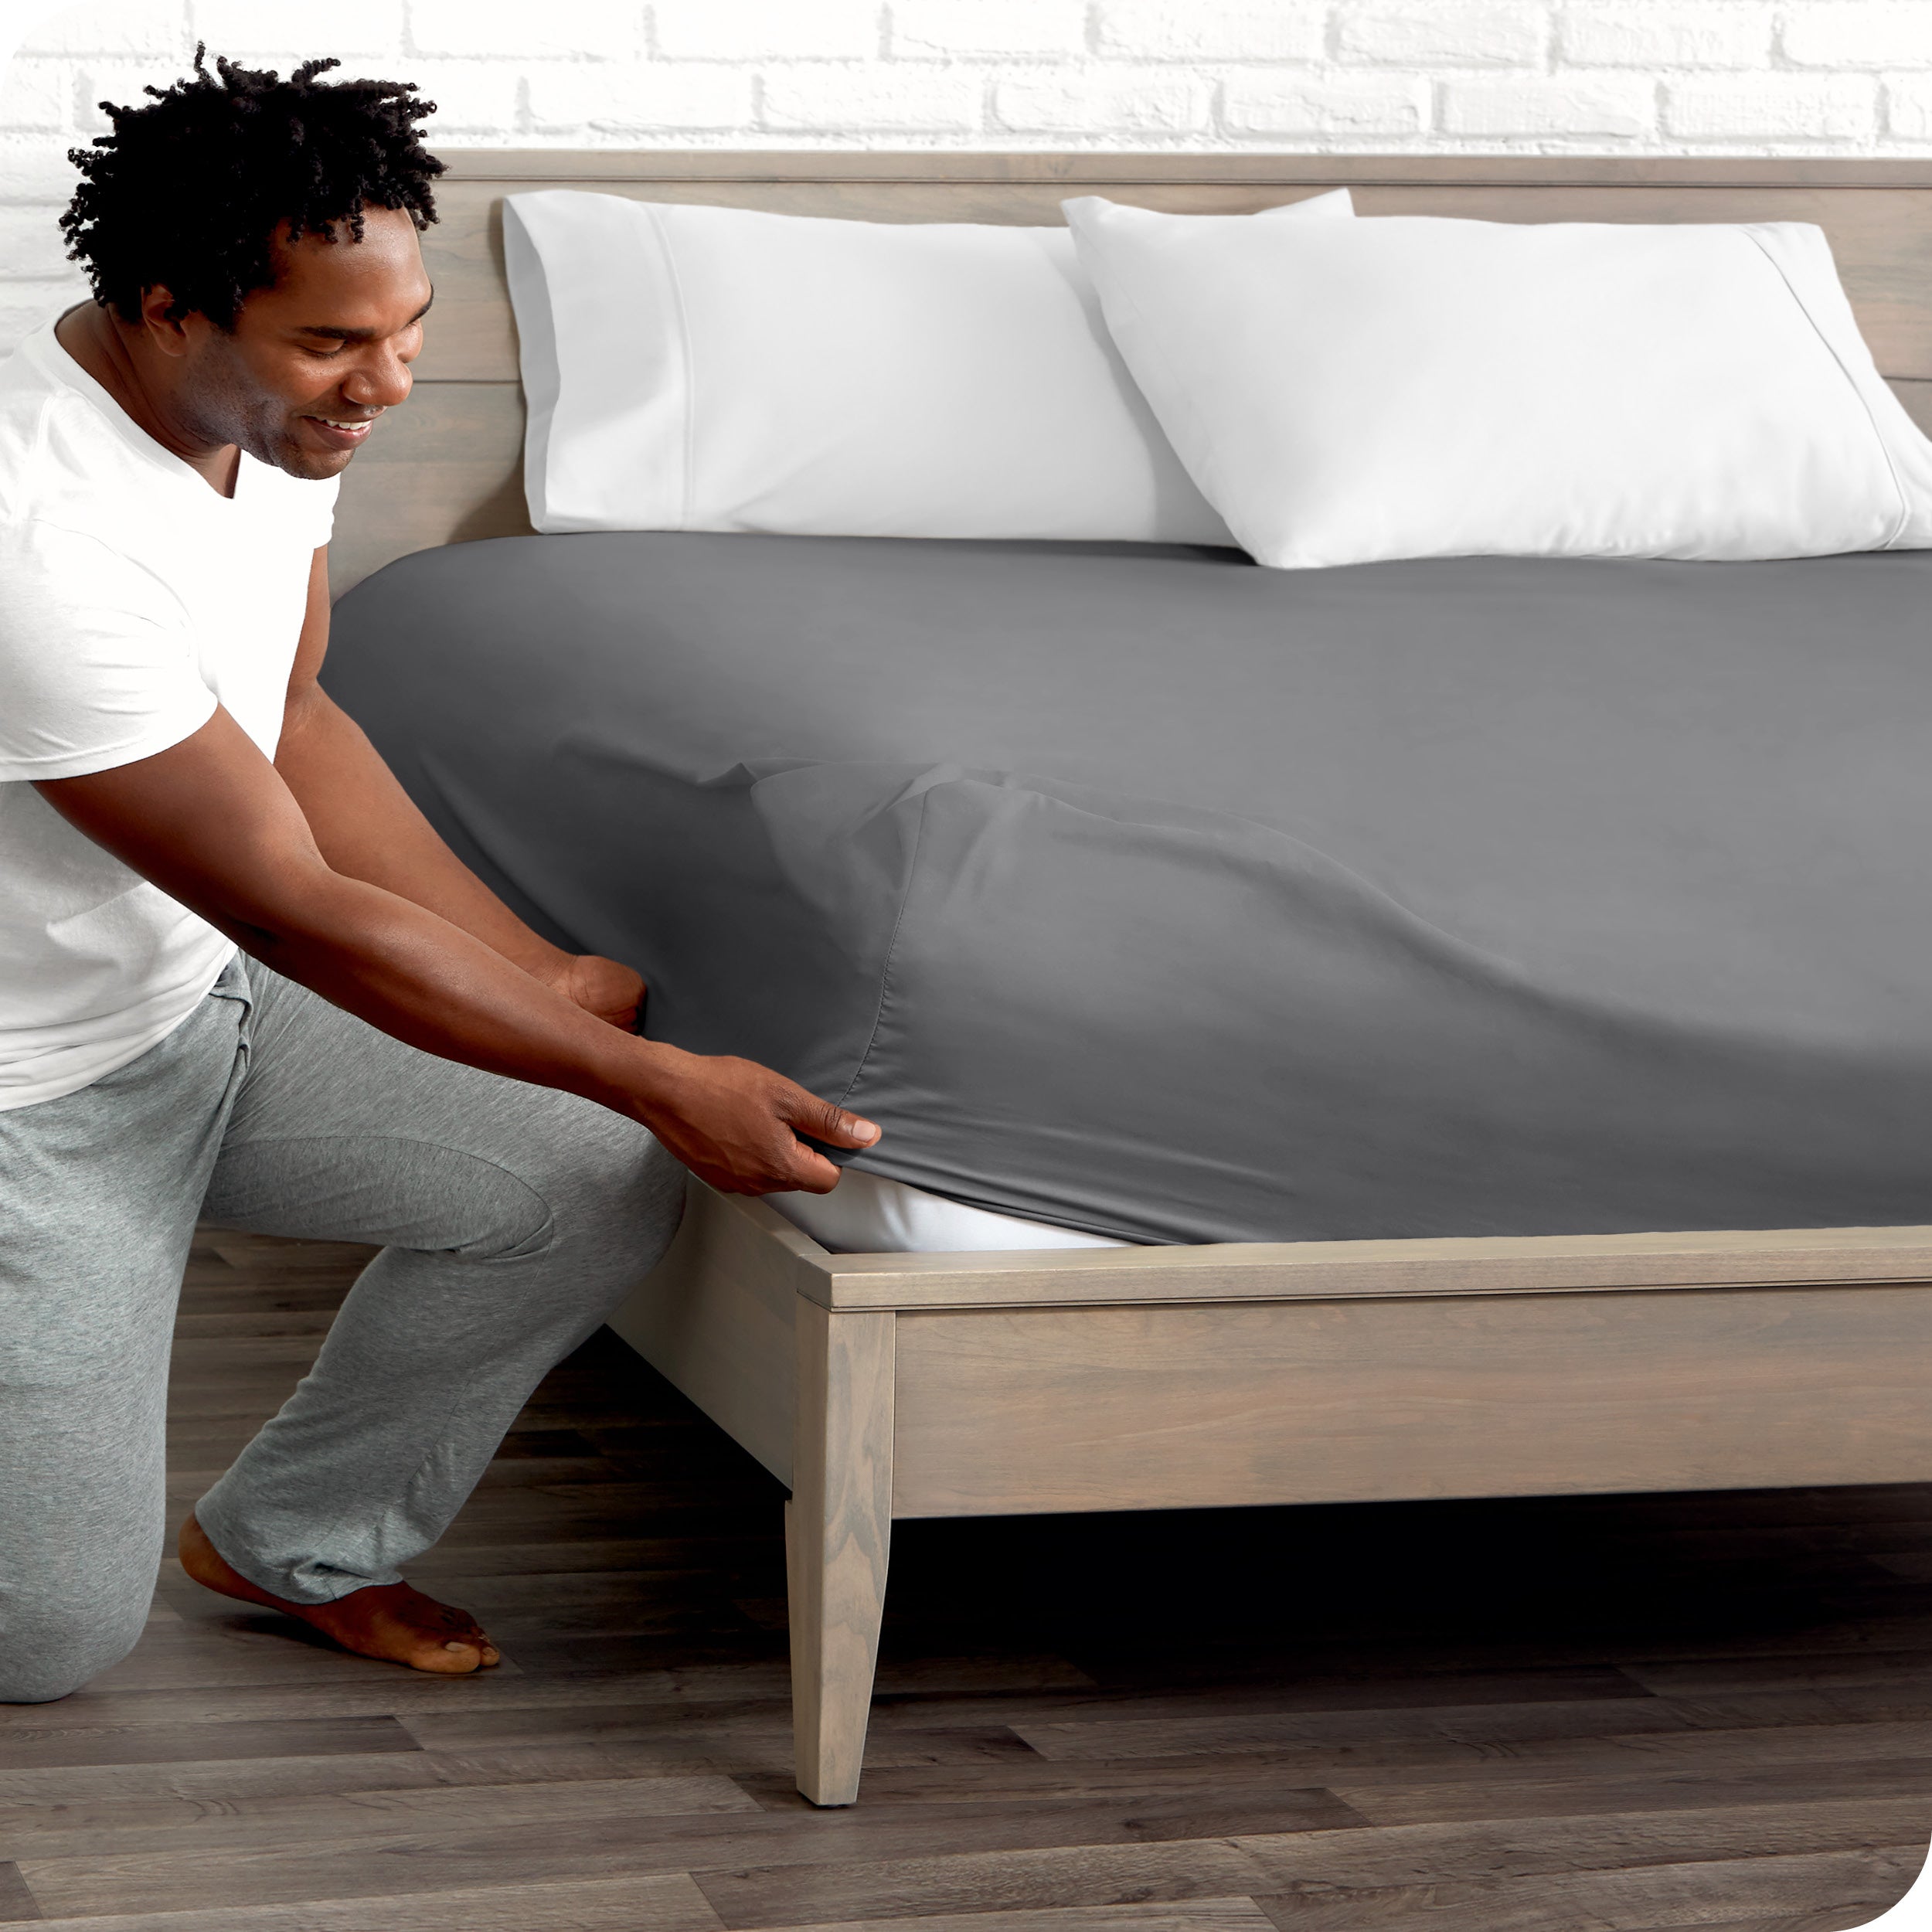 A man is kneeling while putting a fitted sheet on a mattress